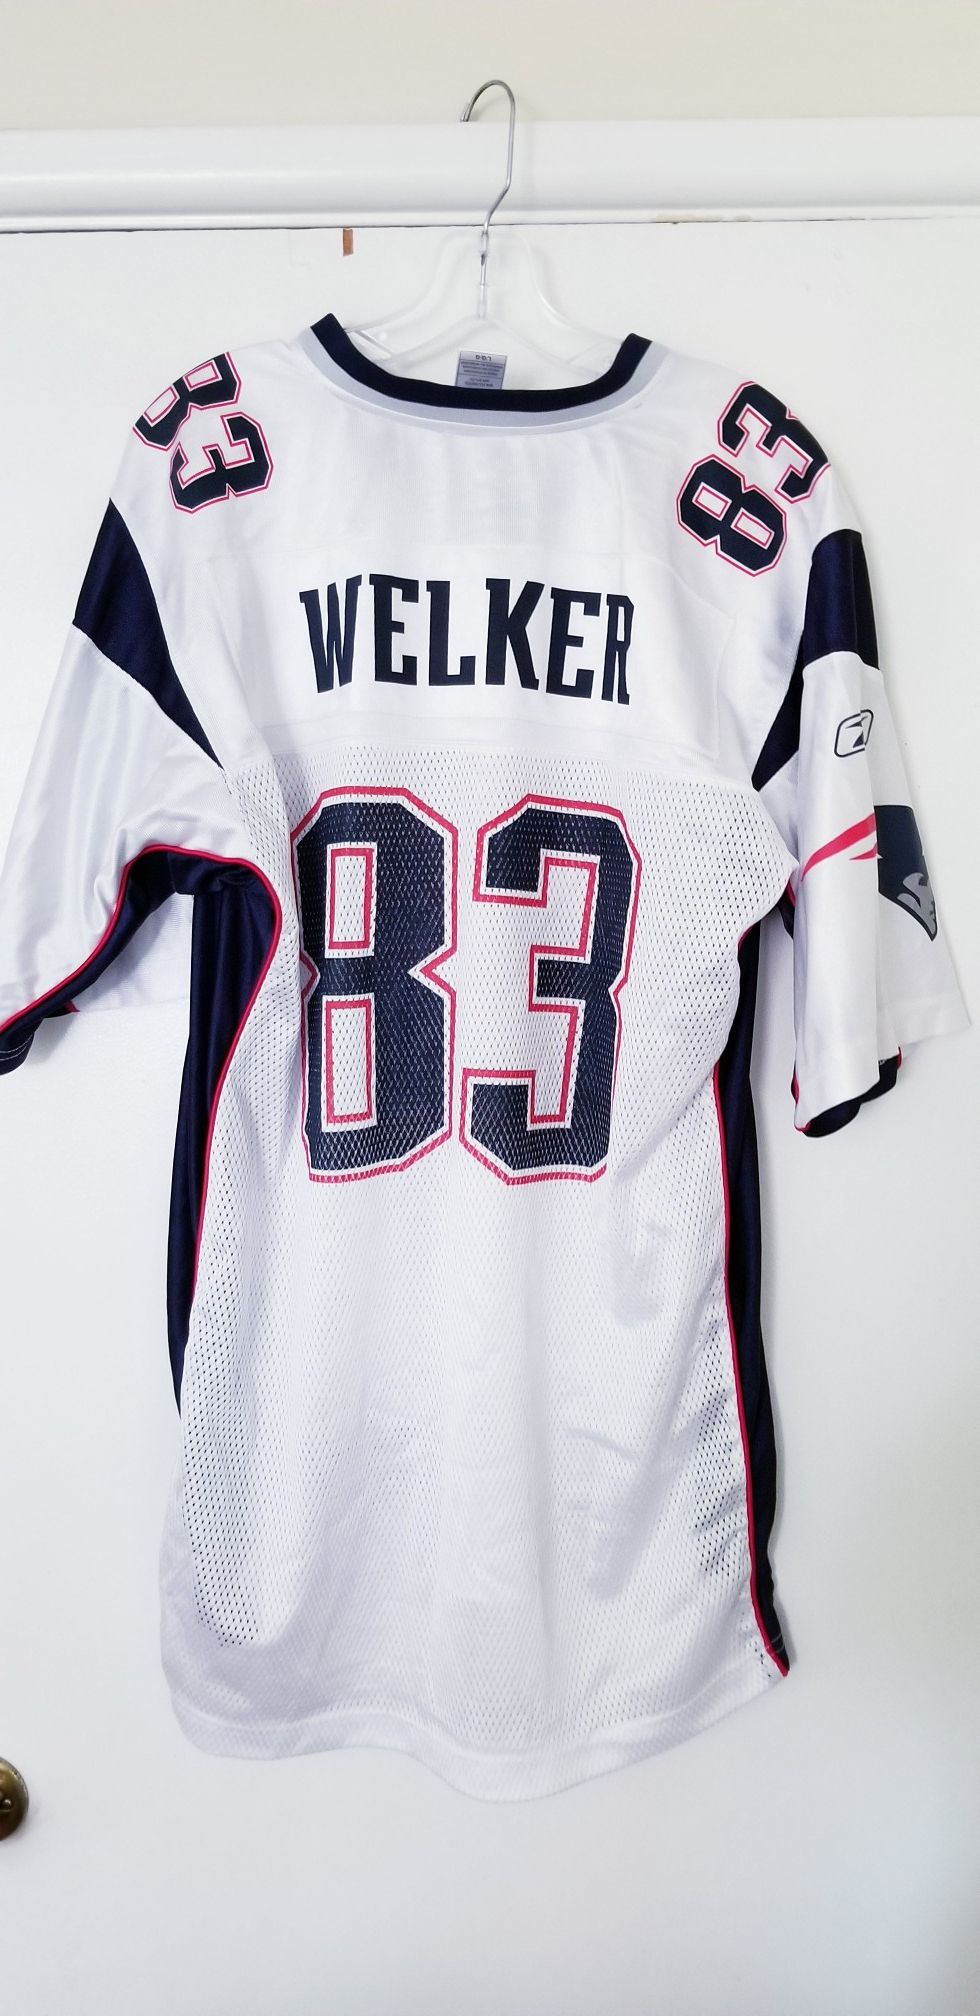 Wes Welker Patriots Large Jersey in Excellent Condition!